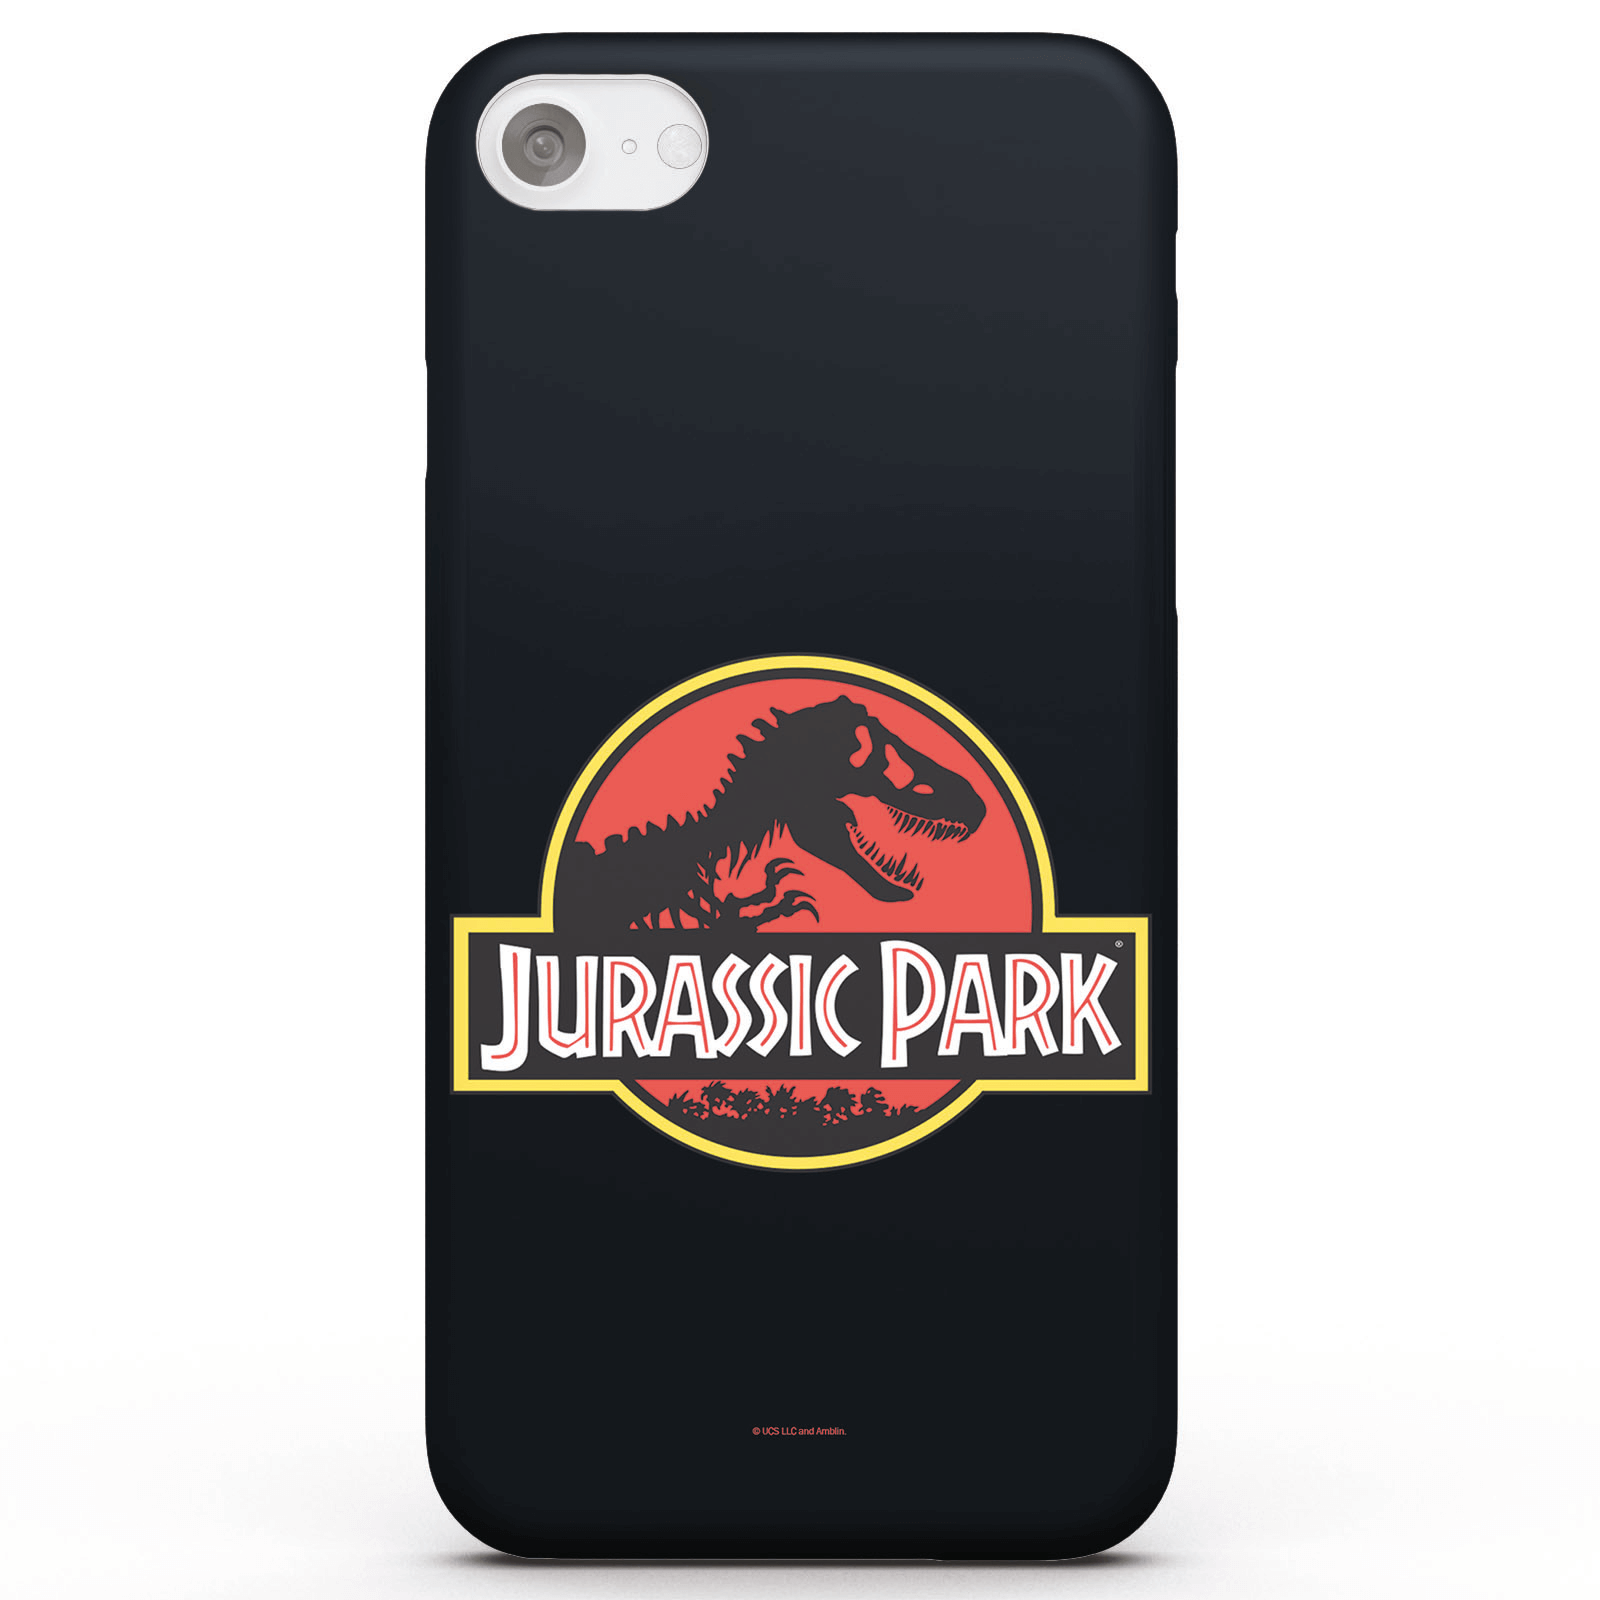 Photos - Case Jurassic Park Logo Phone  for iPhone and Android - iPhone 5C - Tough C